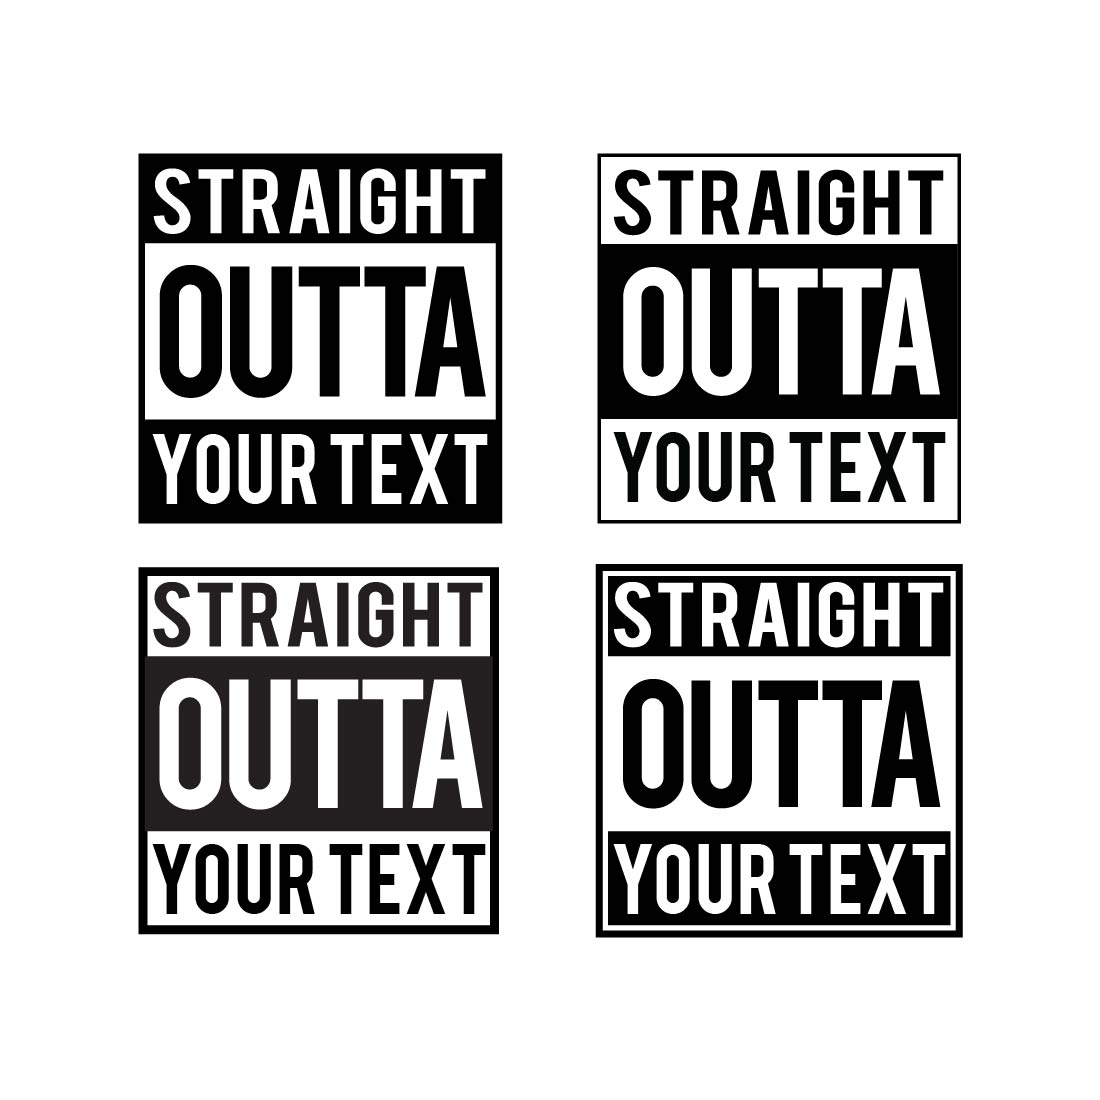 Straight Outta svg, Straight outta cut file,Cricut, Silhouette, Vinyl,Straight outta shirt,Instant digital download - svg,dxf,ai,eps,png,pdf preview image.